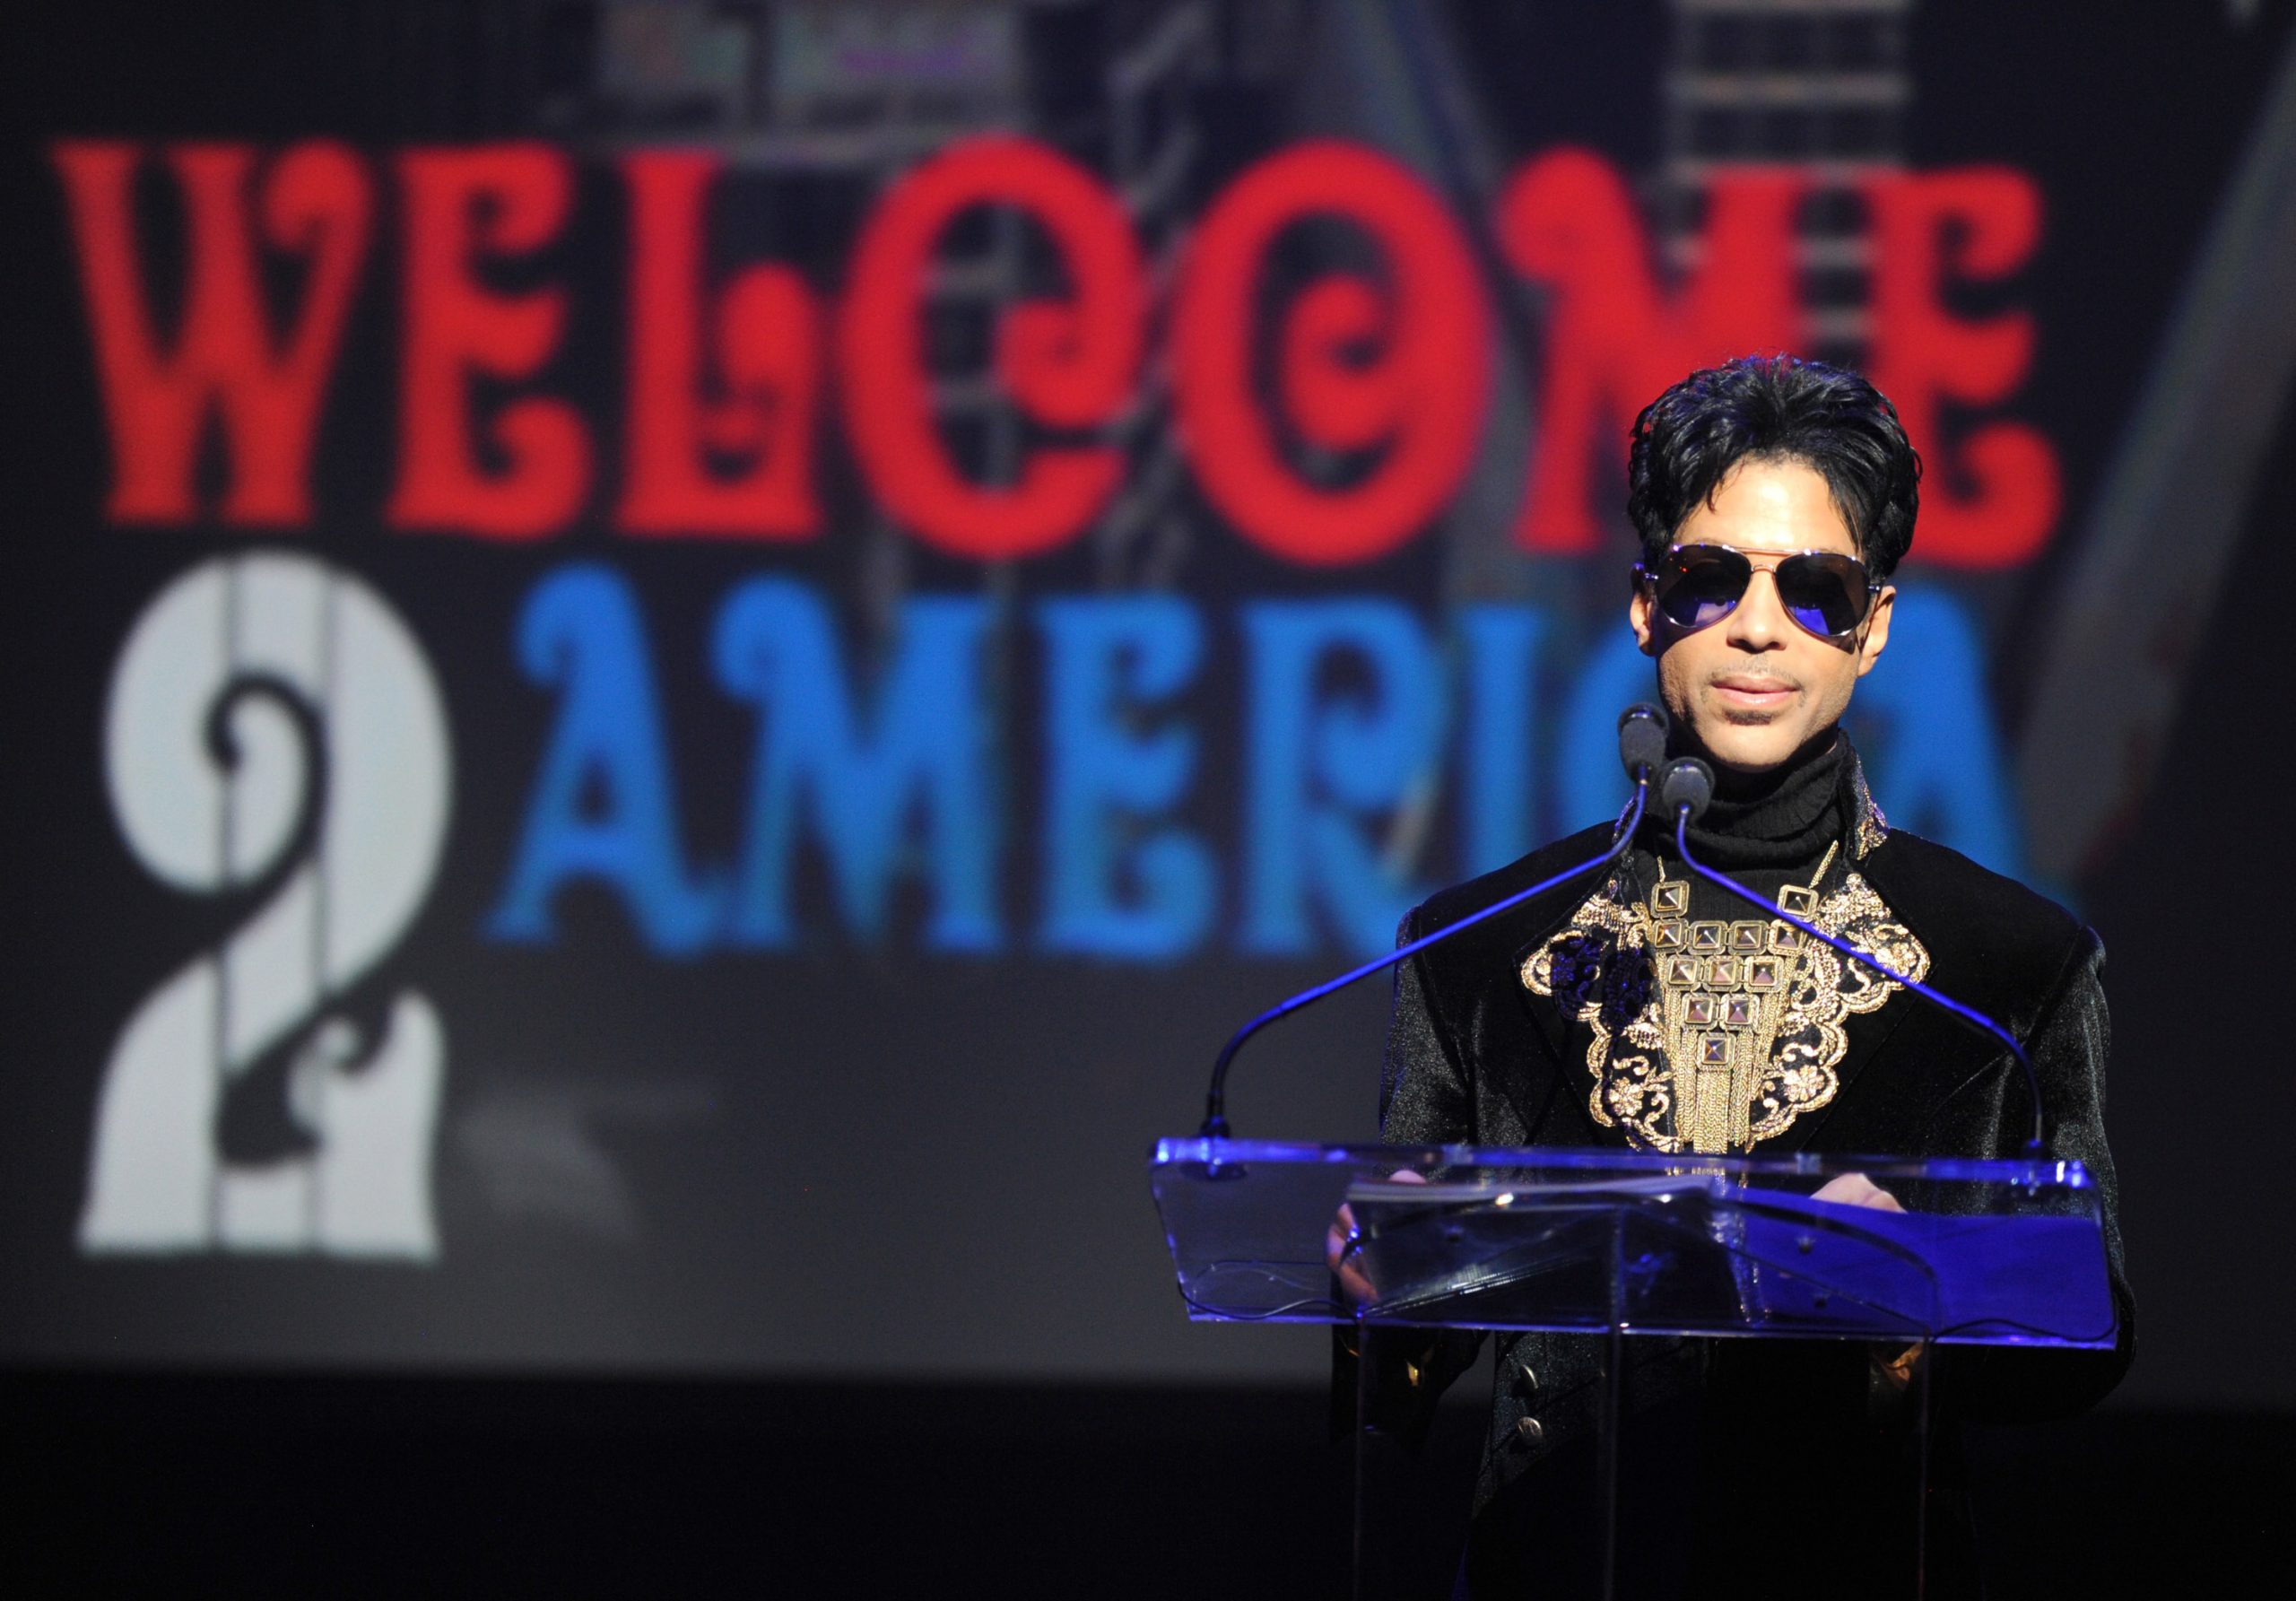 The peculiar story behind 'Welcome 2 America', Prince's posthumous album